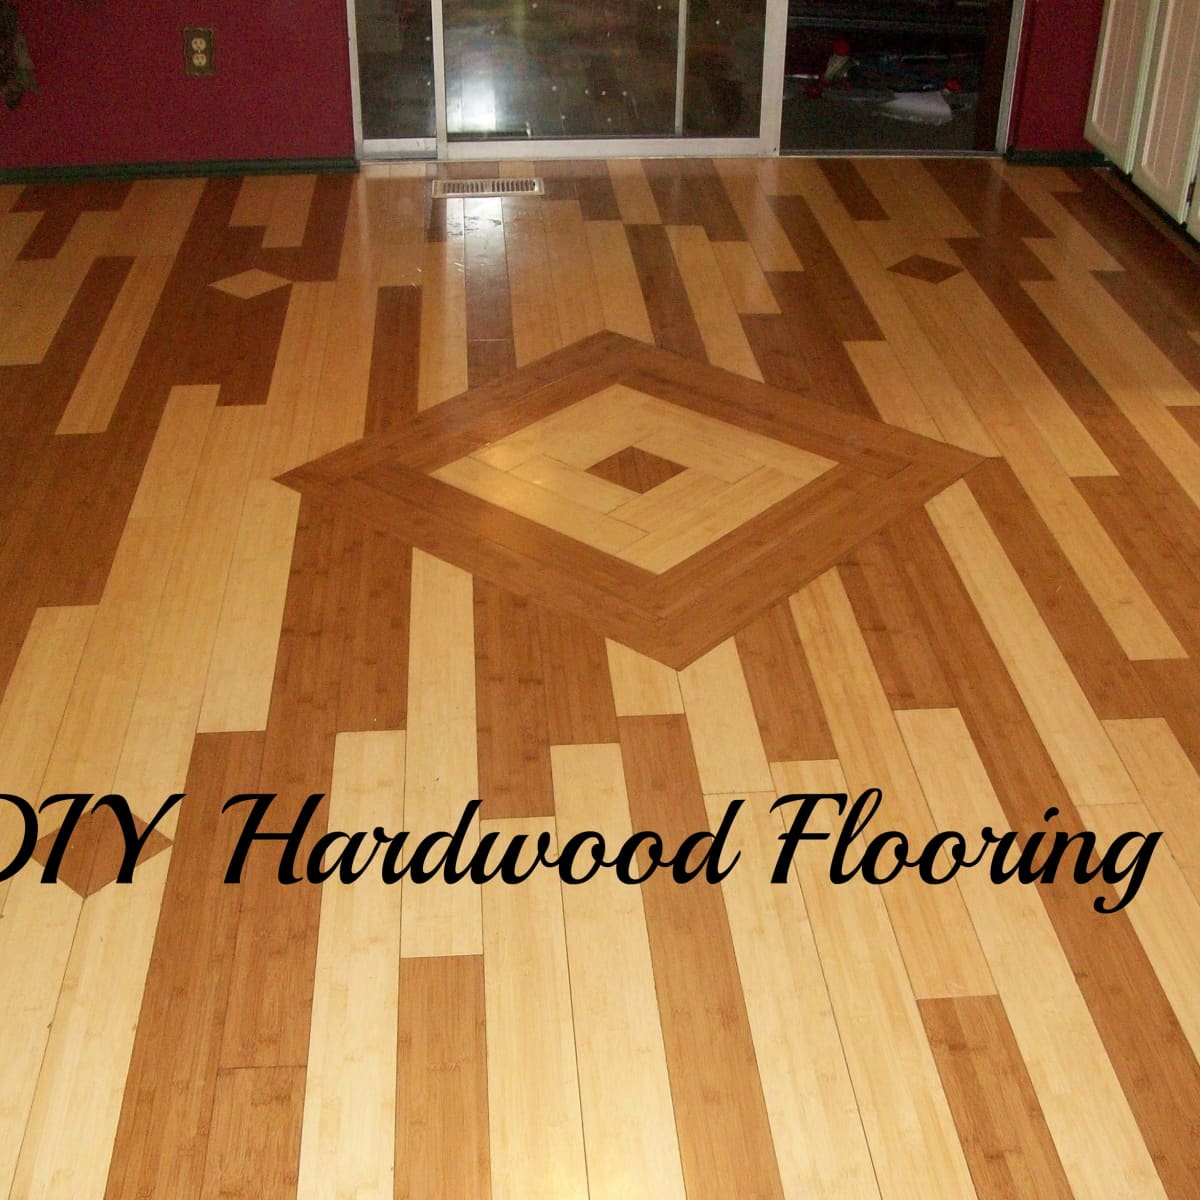 A Hardwood Floor Installation Guide for Both Engineered and Non-Engineered  Wood Flooring - Dengarden